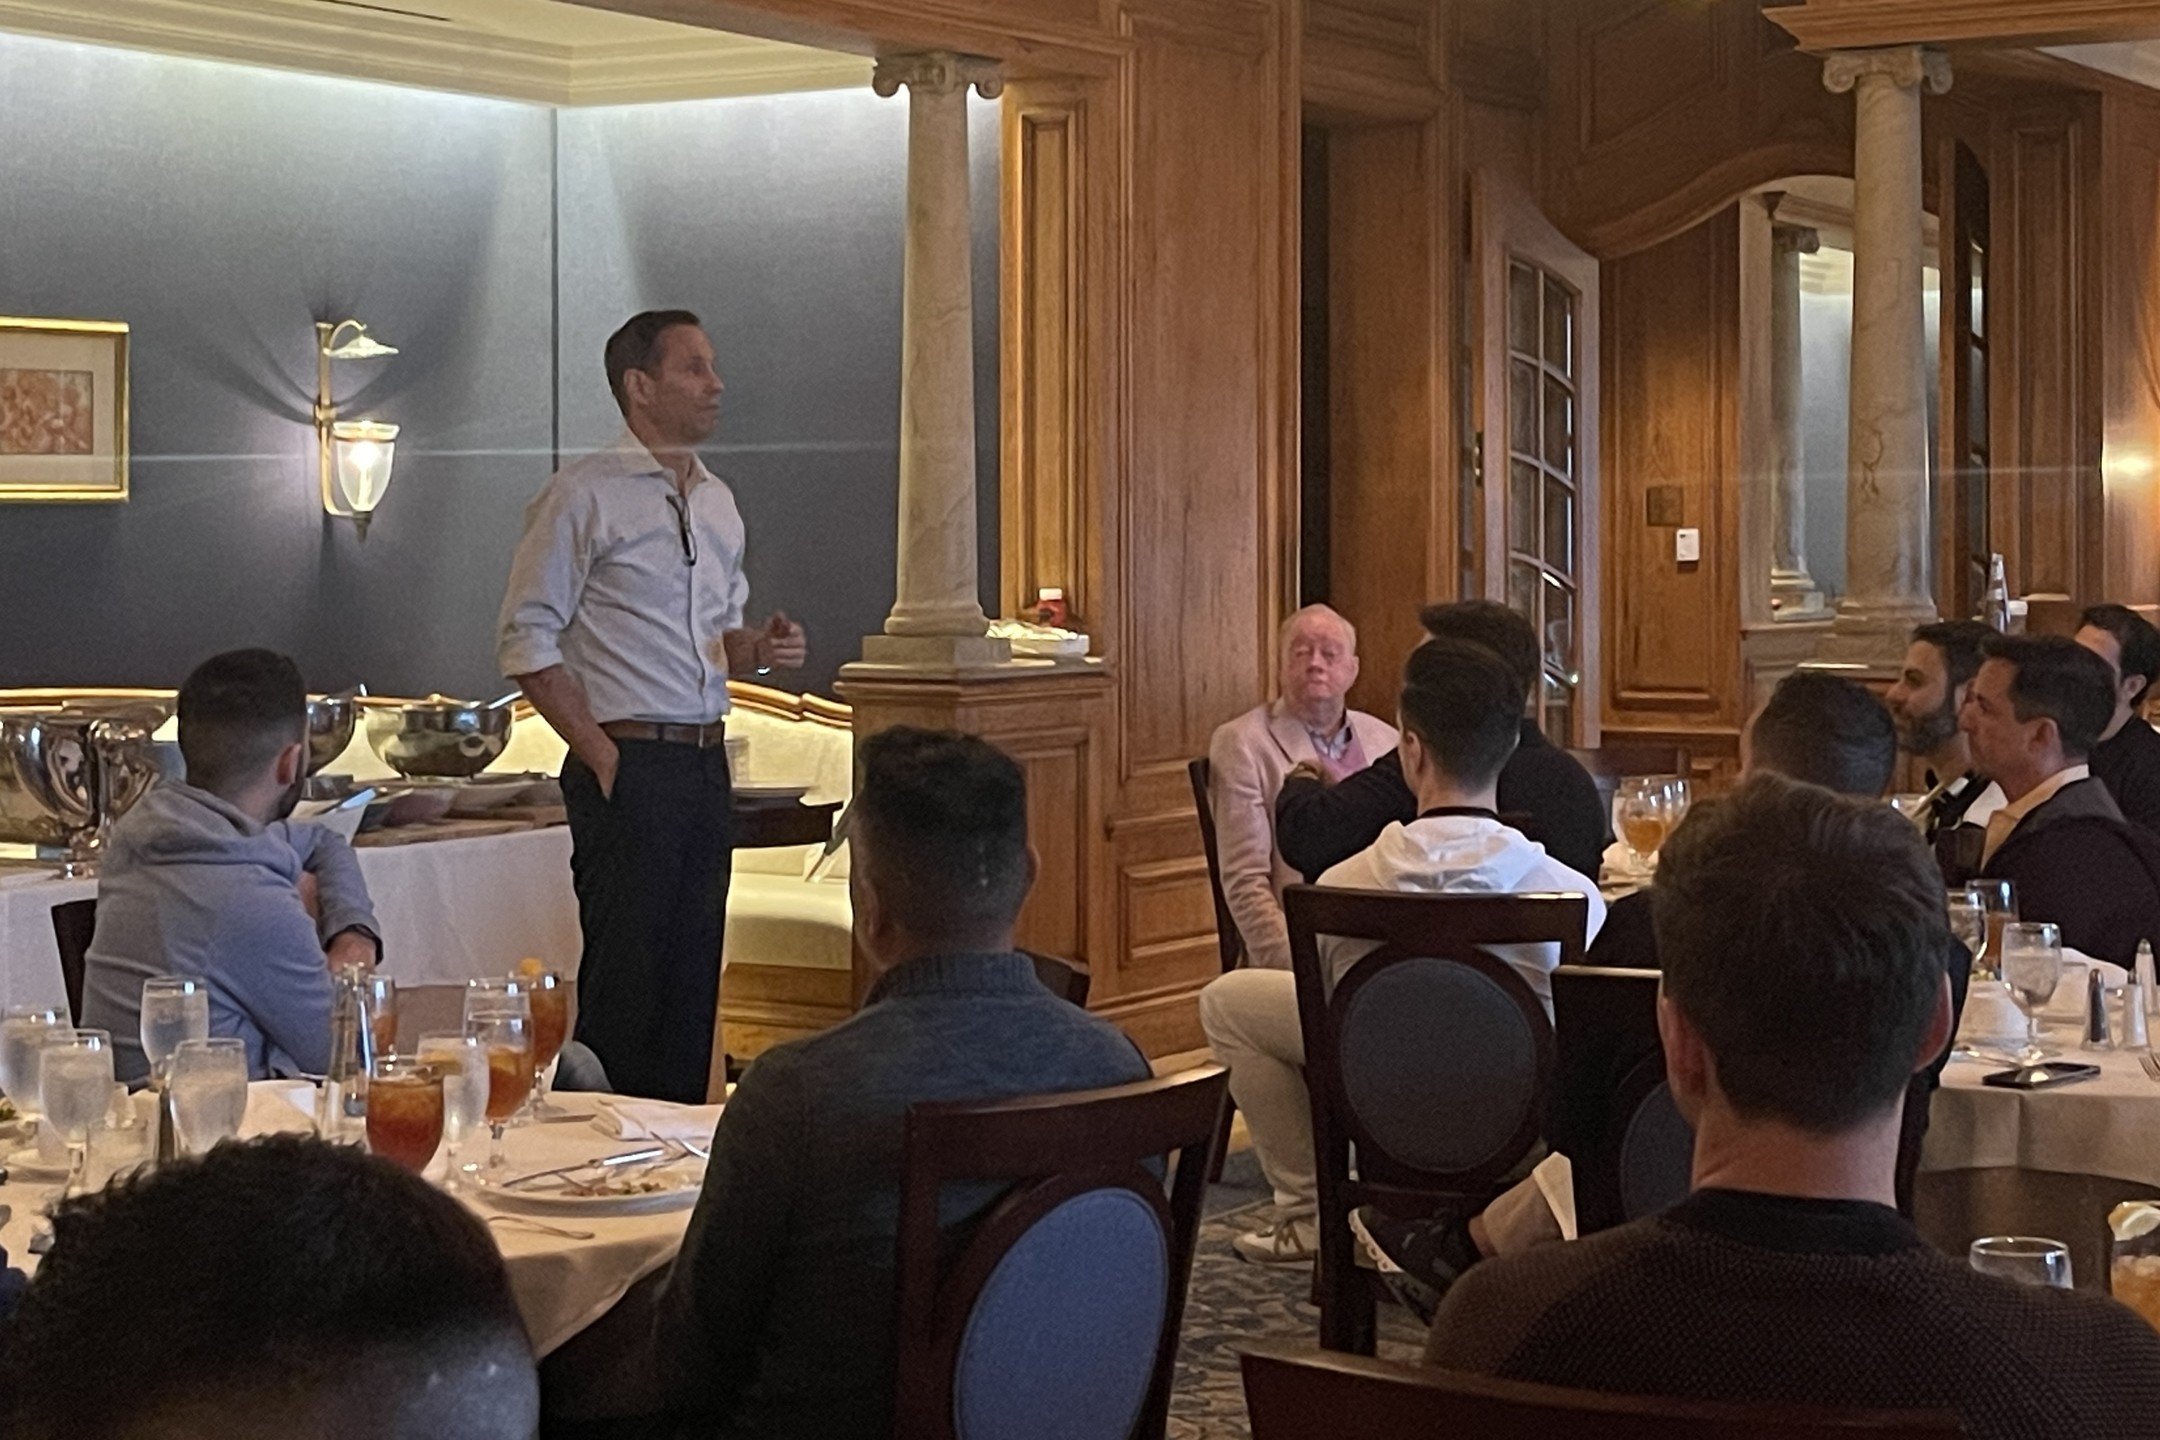 A productive afternoon answering questions from a room full of Young Presidents Organization (@YPOGlobal) - Dallas Chapter members, discussing the work we're doing, the challenges that still lie ahead, and my vision for the future of Texas.

Thank yo